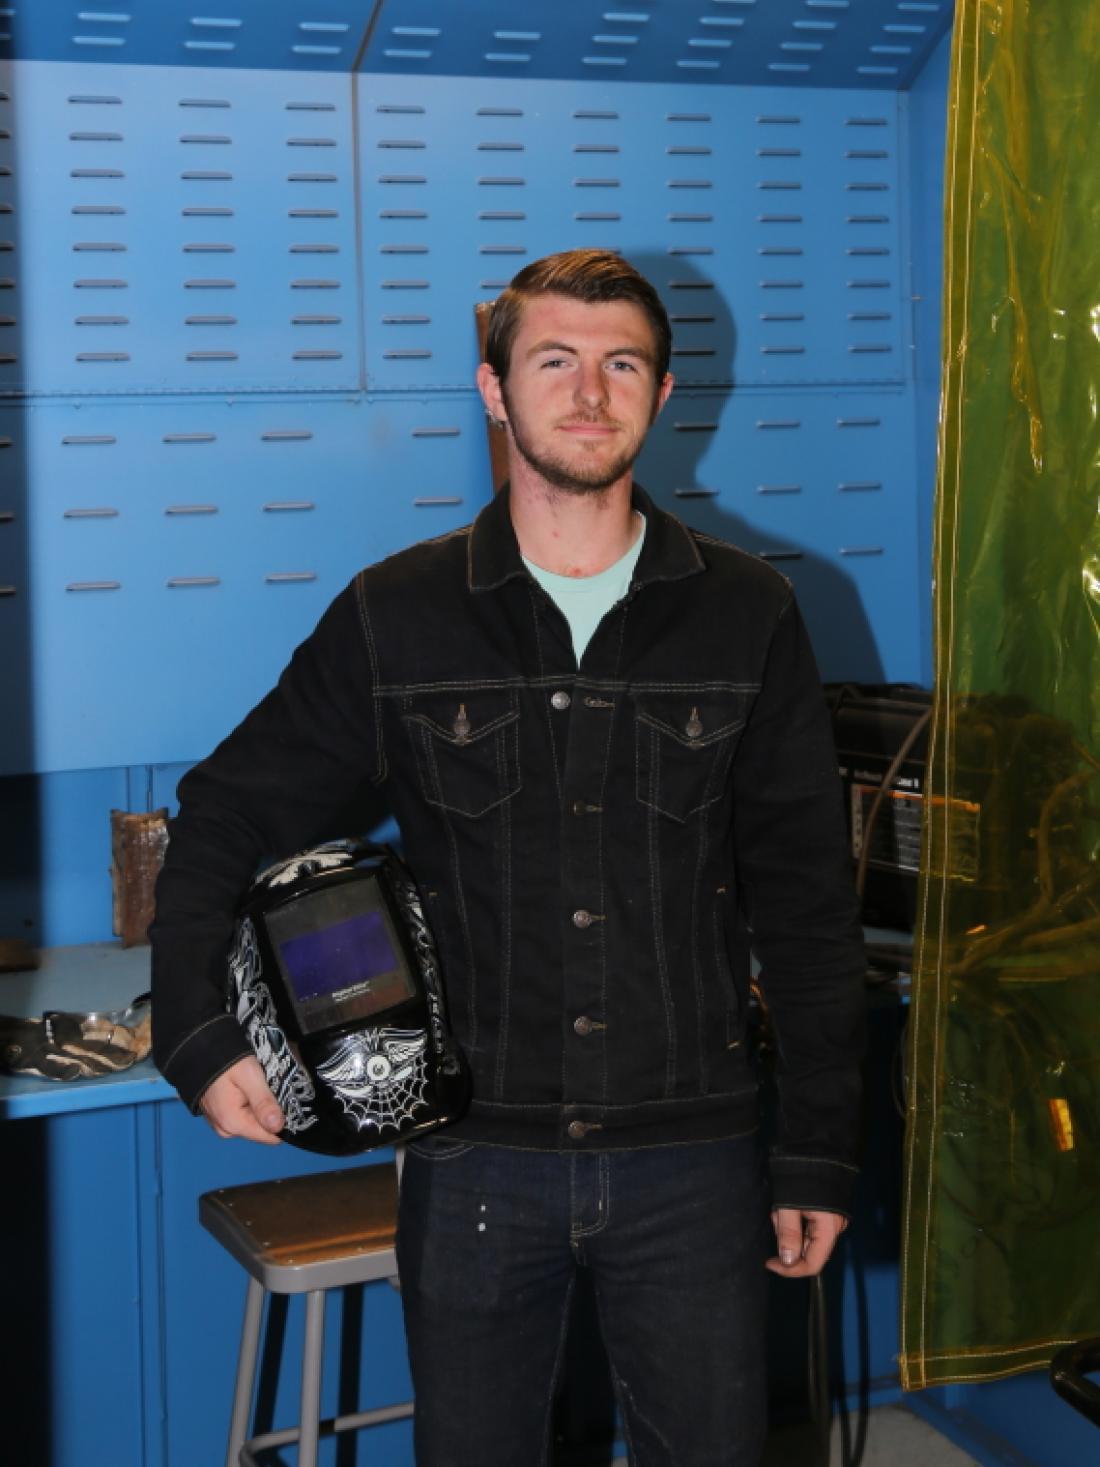 Craven Community College and Early College EAST student Zack Farnham stands in his welding booth in the college’s welding department. (Photo by Meredith Laskovics)